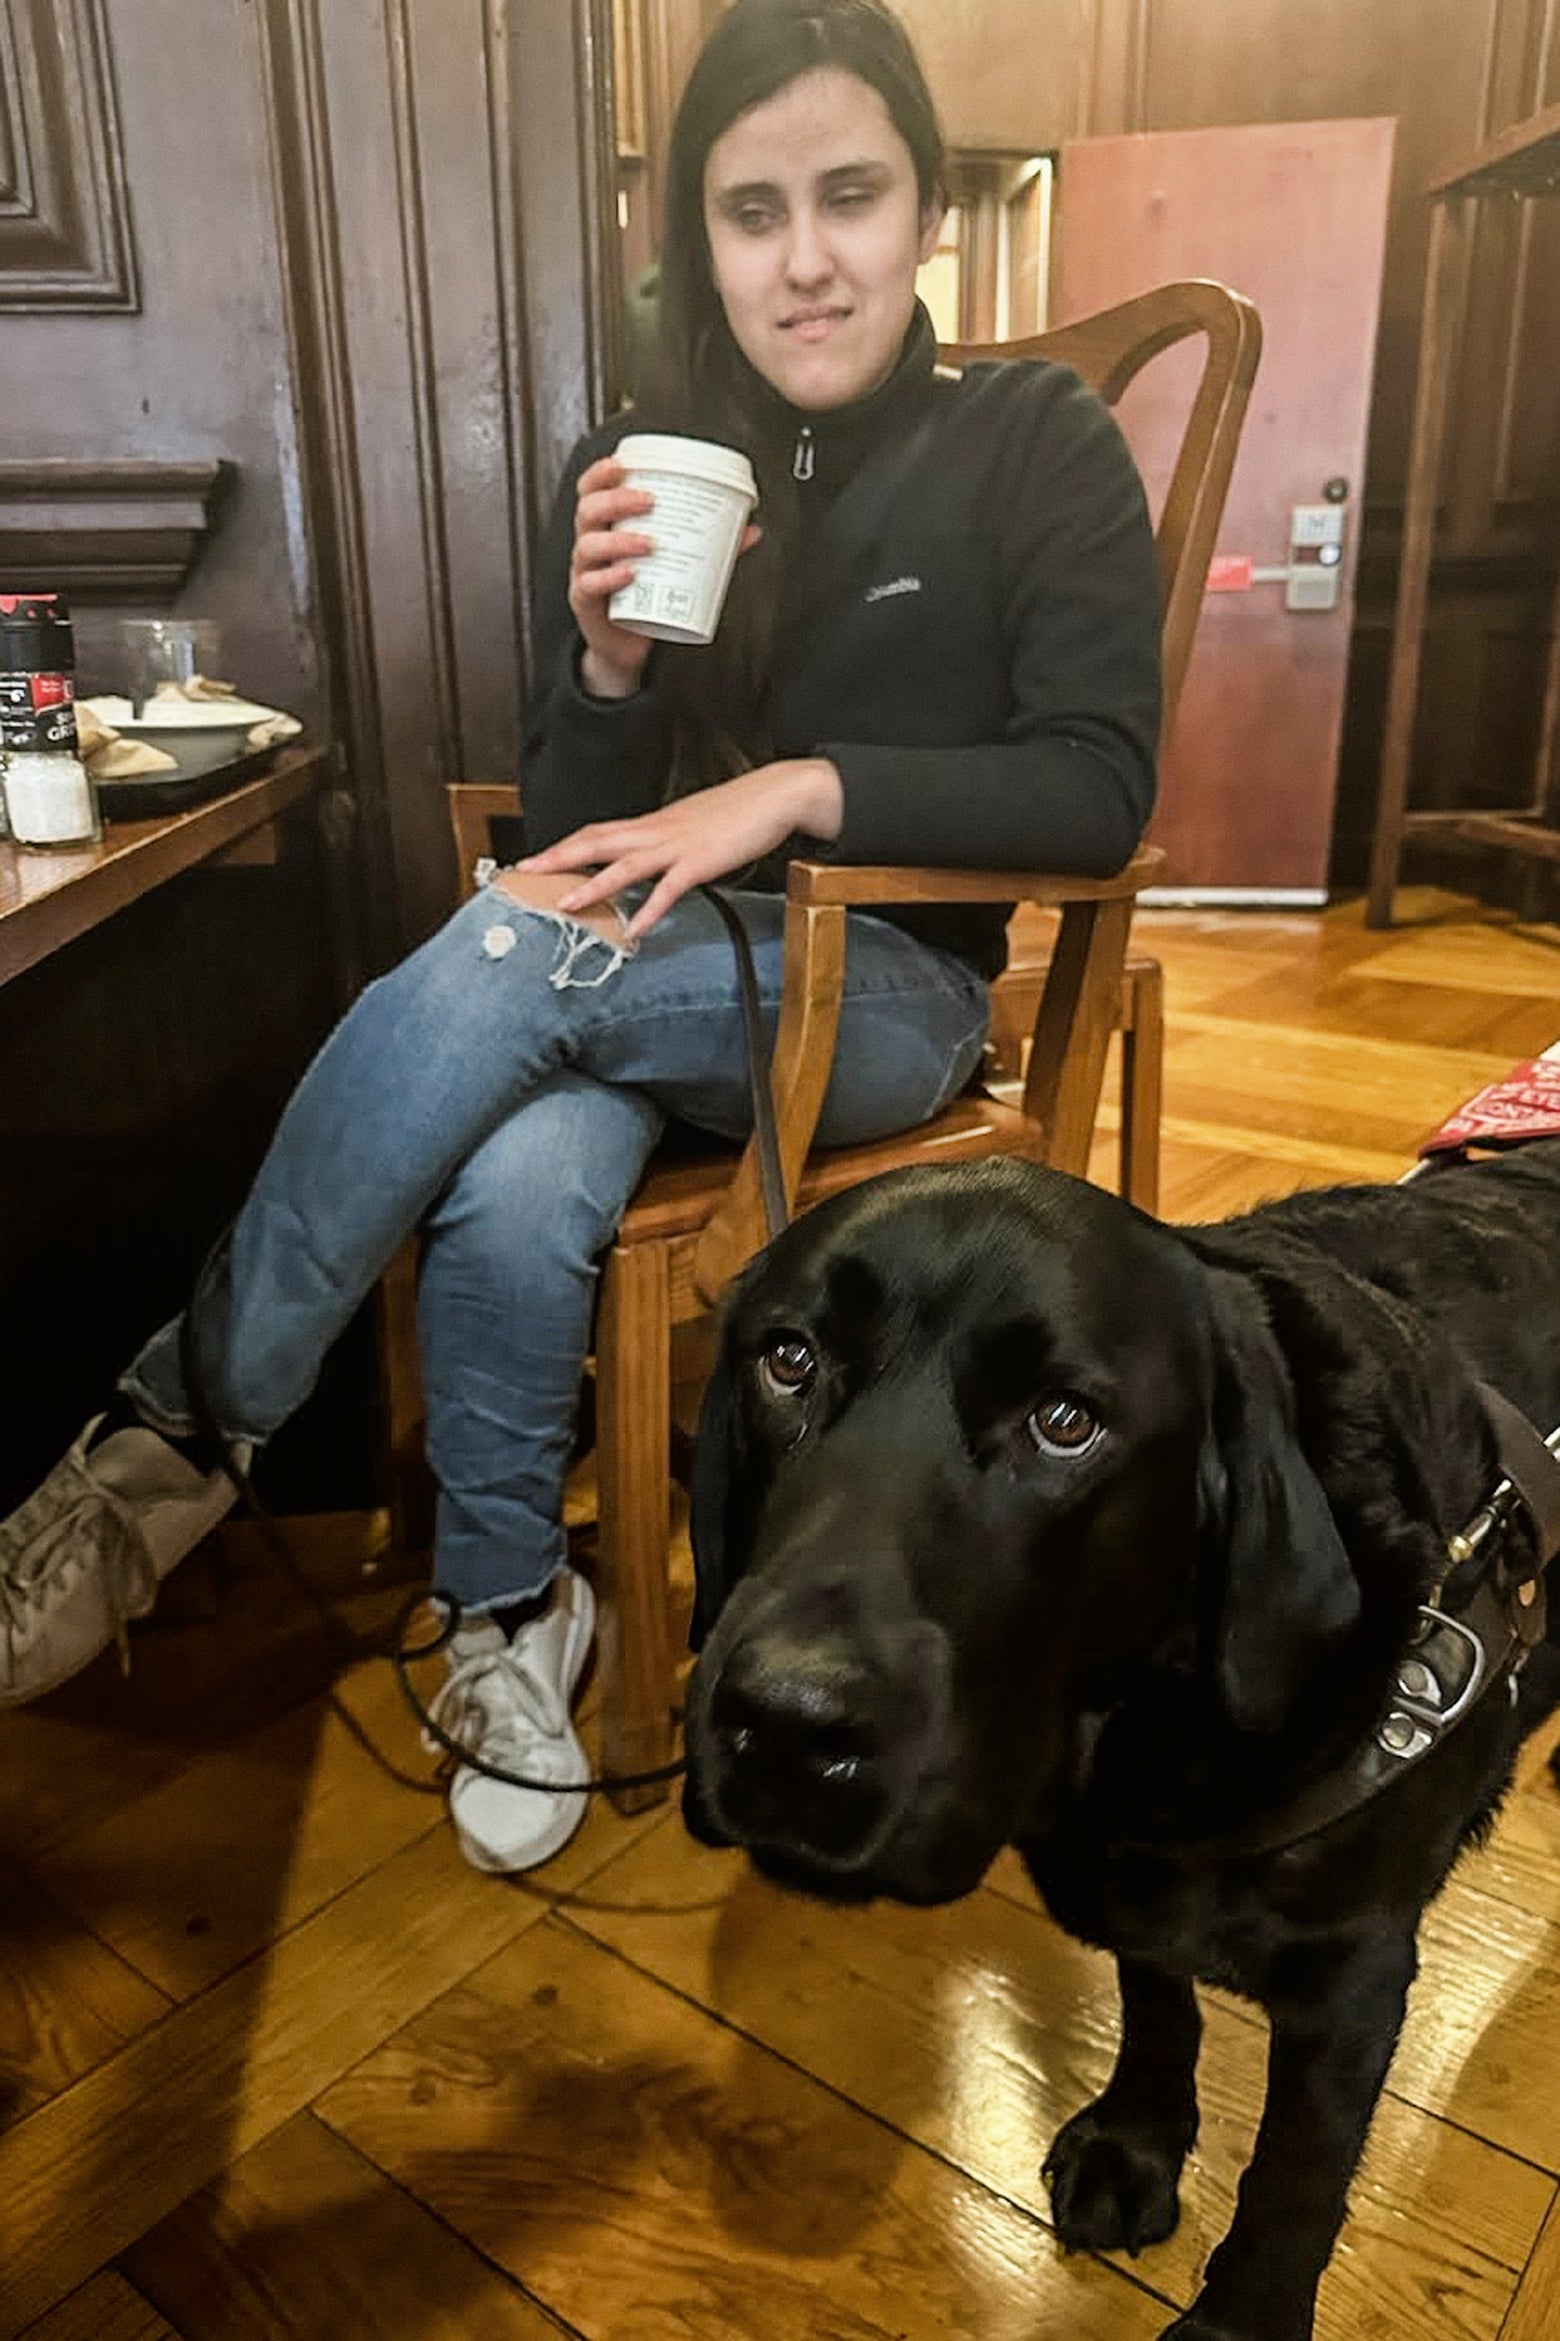 The picture shows a young woman sitting on a wooden chair in what appears to be a cozy café with wooden interiors. She is wearing a black jacket and blue jeans, and holding a white paper cup, possibly with a hot beverage. She has a somewhat serious expression on her face. To her right, there is a black Labrador dog standing on the wooden floor, looking directly at the camera. The dog is wearing a guide dog harness and looks serious. On the table next to the woman, there are condiments like salt and pepper, and a red bag of chips. The atmosphere seems relaxed and casual.